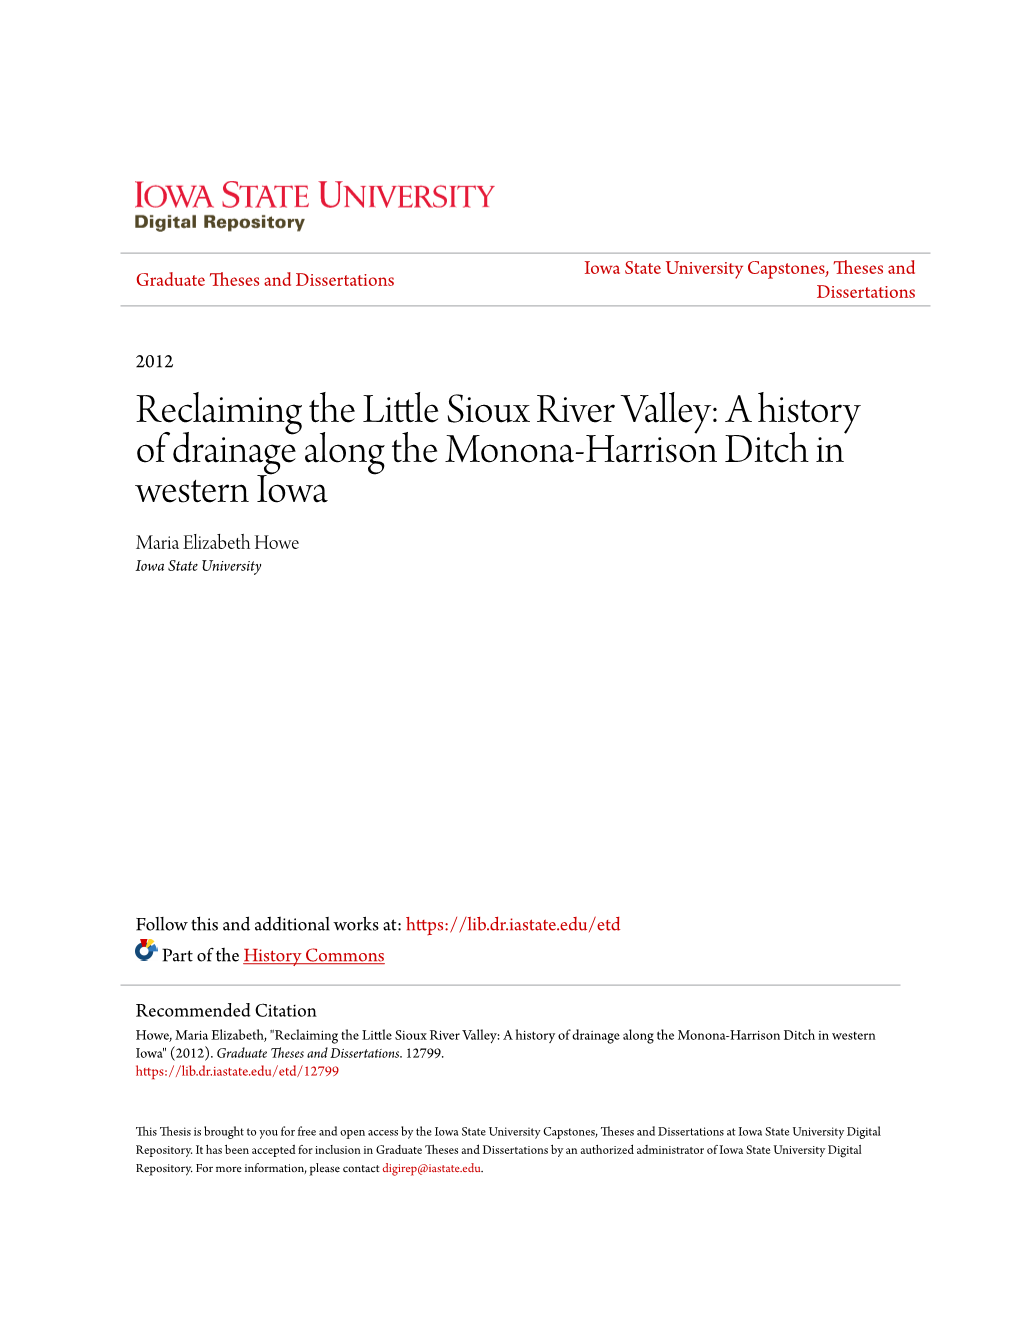 Reclaiming the Little Sioux River Valley: a History of Drainage Along the Monona-Harrison Ditch in Western Iowa